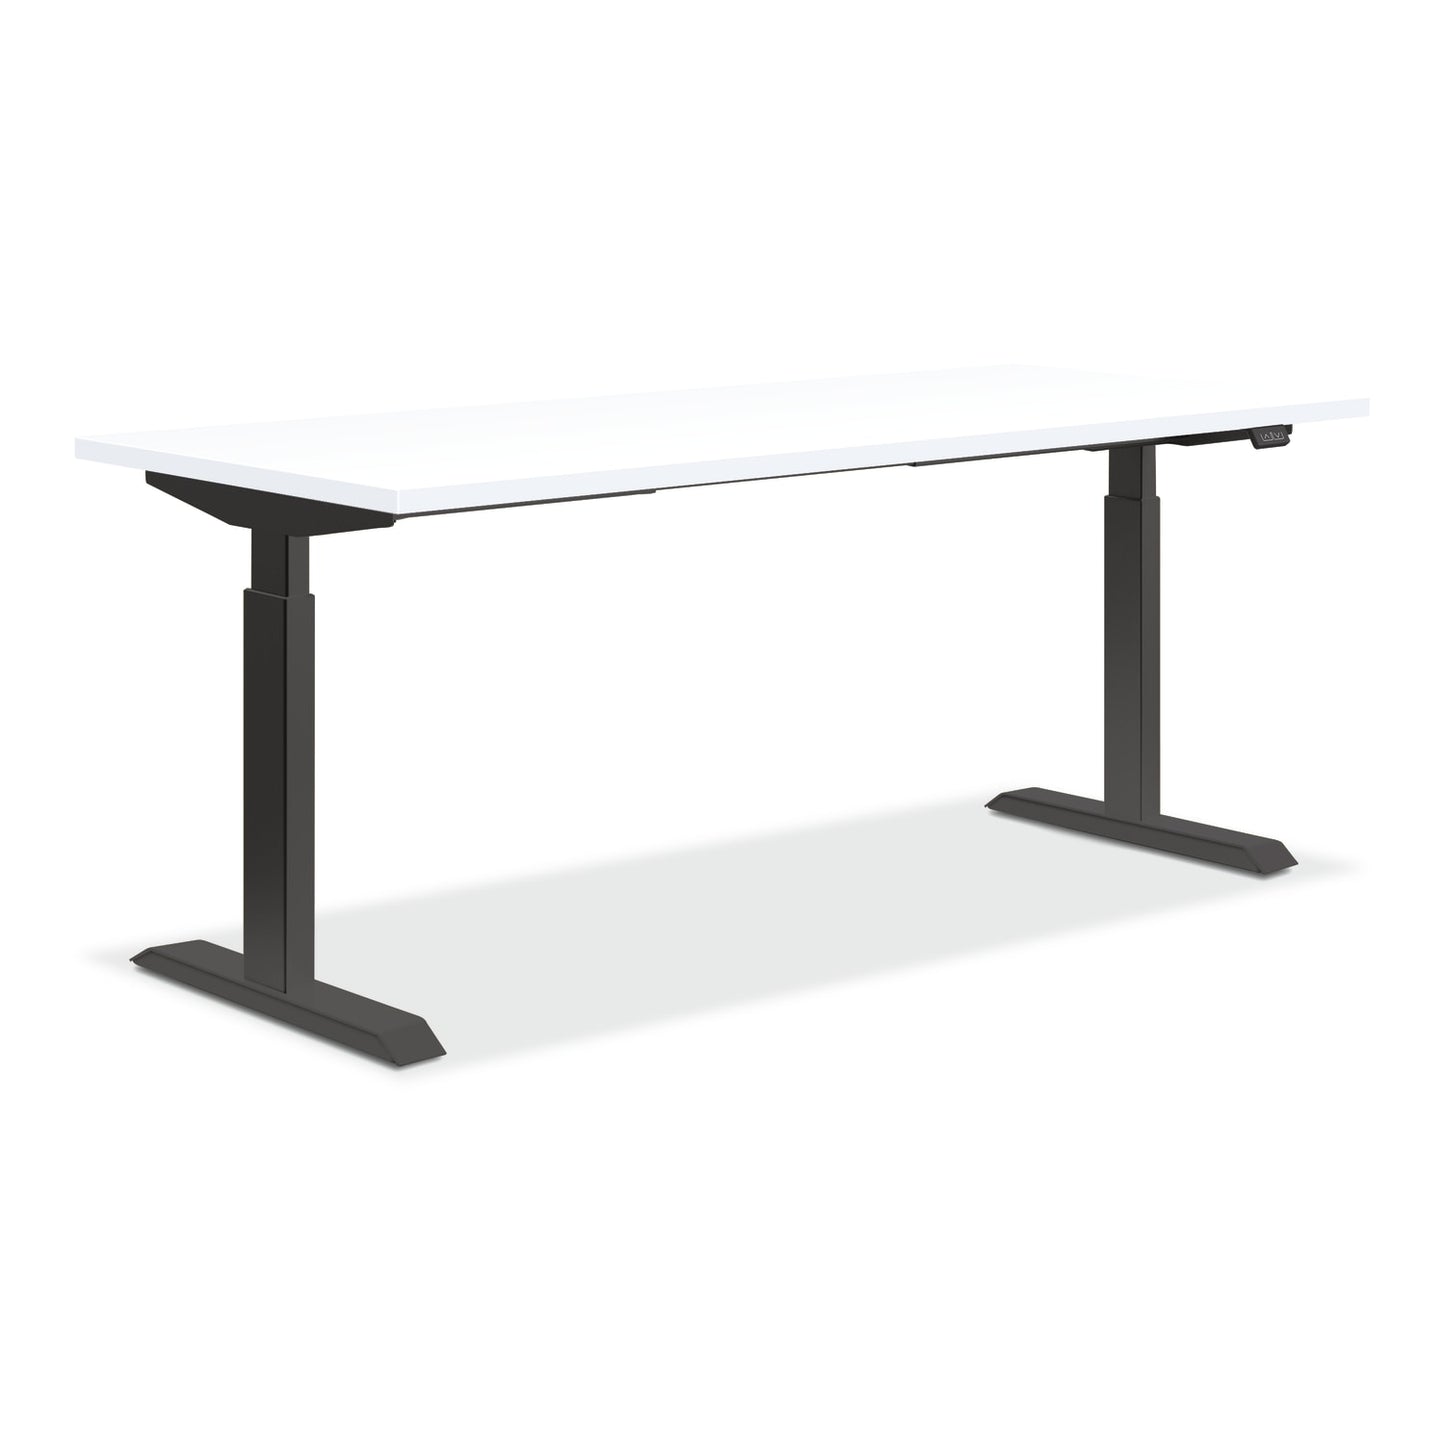 HON Coze Worksurface with Coordinate Height Adjustable Base |48"W x 24"D | Designer White Laminate